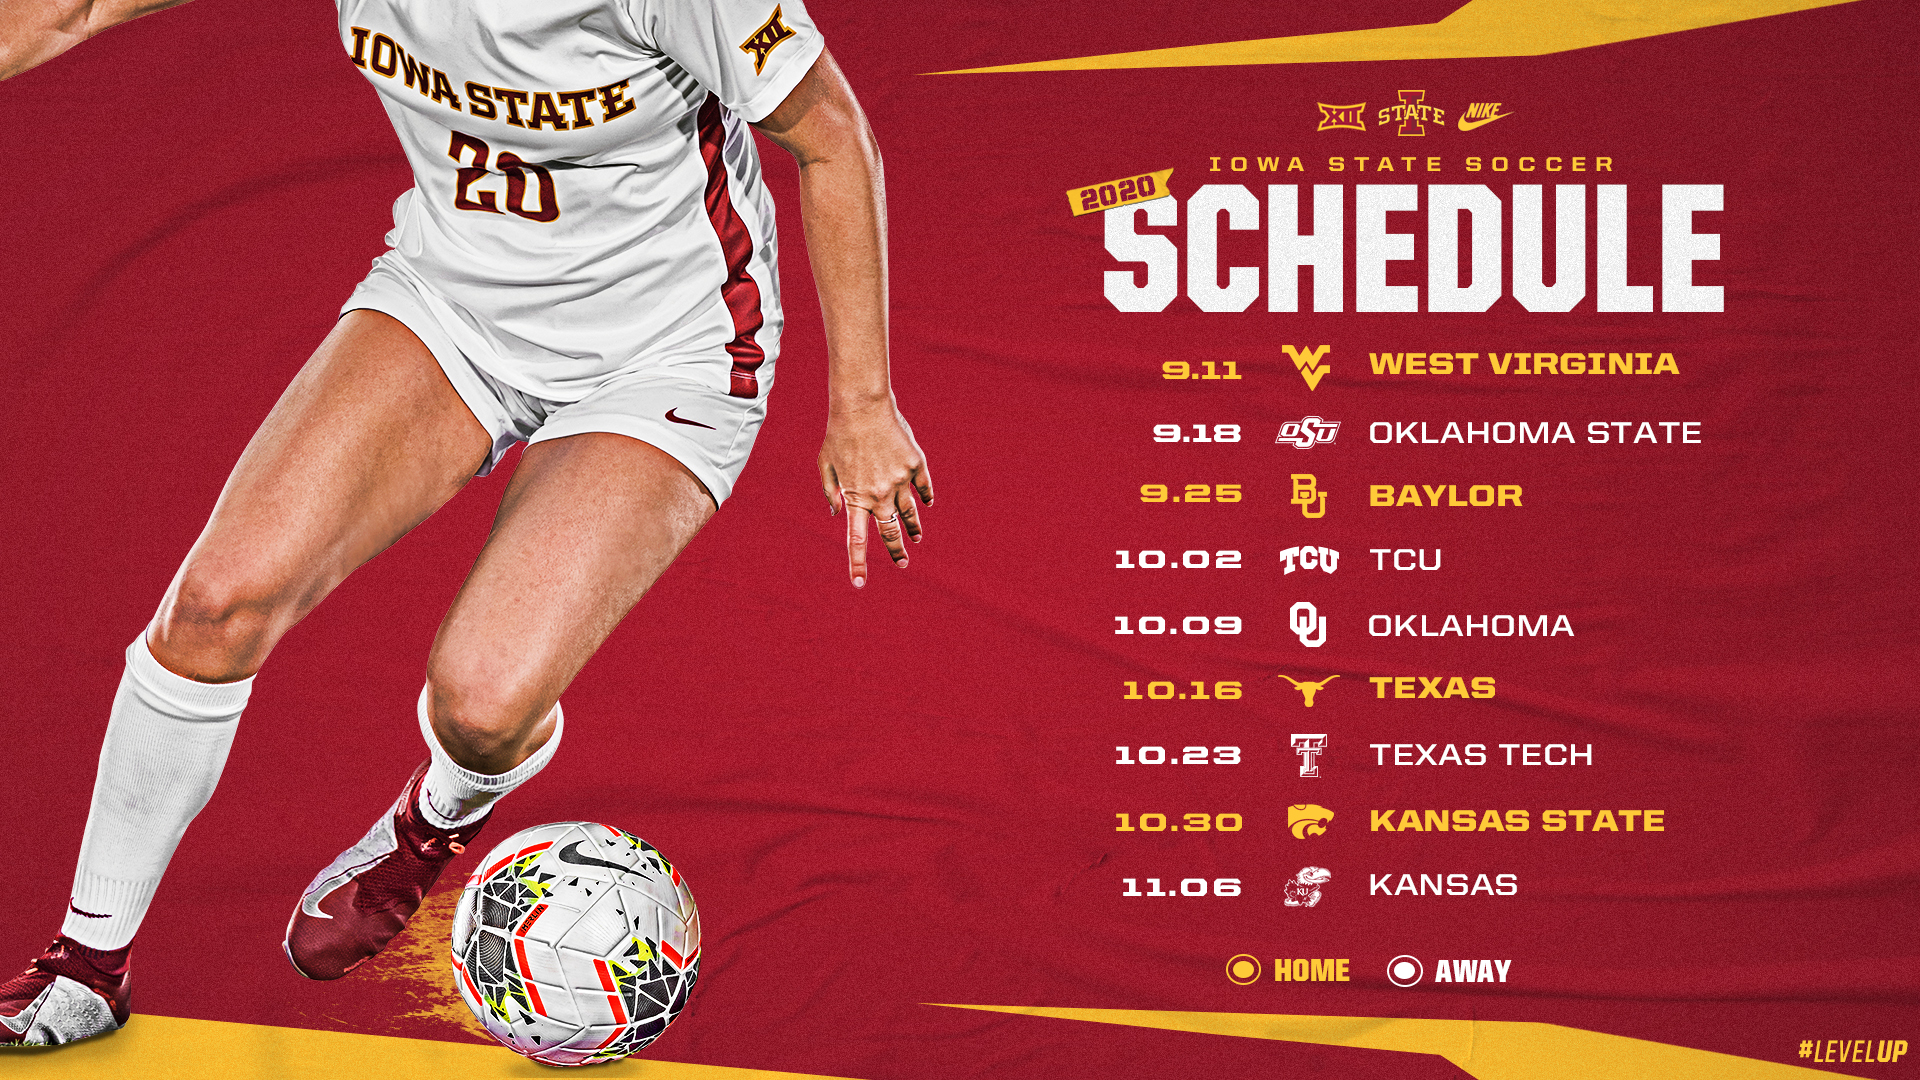 Iowa State Soccer on Twitter "Soccer. Is. Back. 👀 our revised 2020